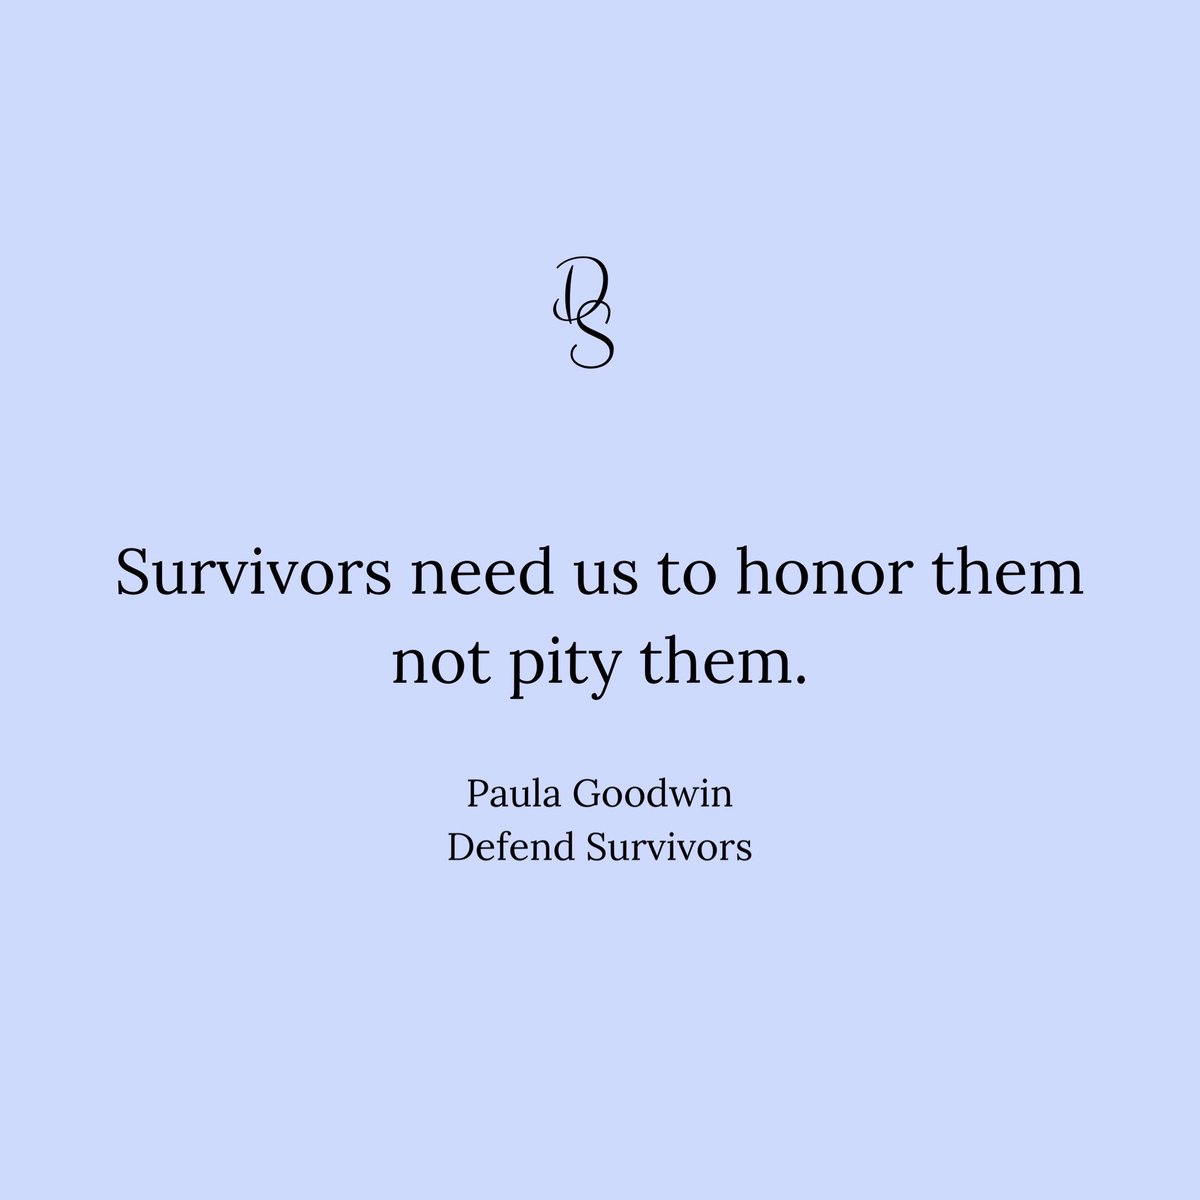 Survivors need us to honor them not pity them. Survivors don’t need ‘oh poor you’. They need ‘wow, you’re amazing to survive that’ and ‘what do you need?’ 
🤍
#honorsurvivors #strength #courage #intelligence #yousurvived #youreamazing #howcanihelp #whatdoyouneed